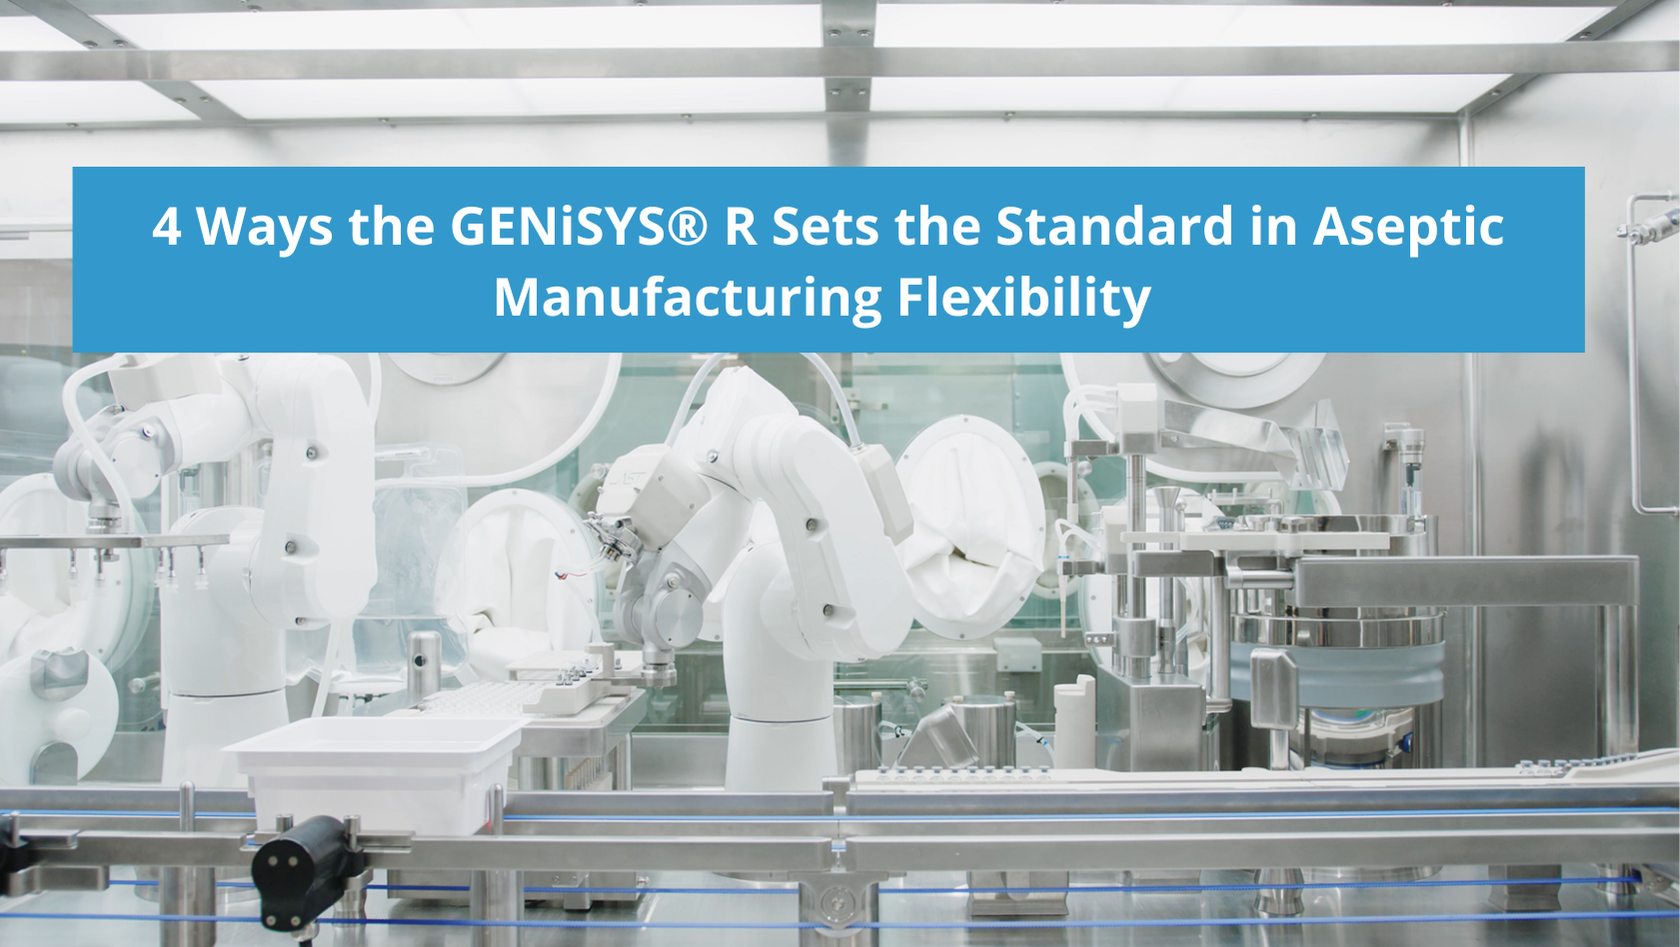 4 Ways the GENiSYS® R Sets the Standard in Aseptic Manufacturing Flexibility